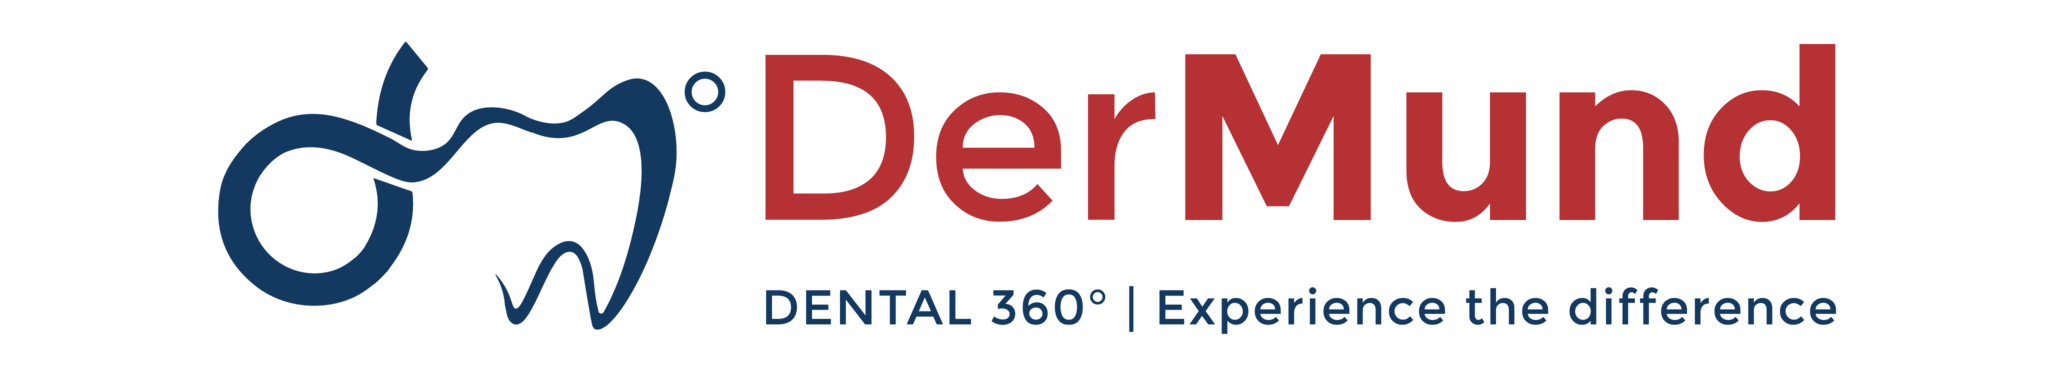 DerMund - Dental 360° | Experience the Difference